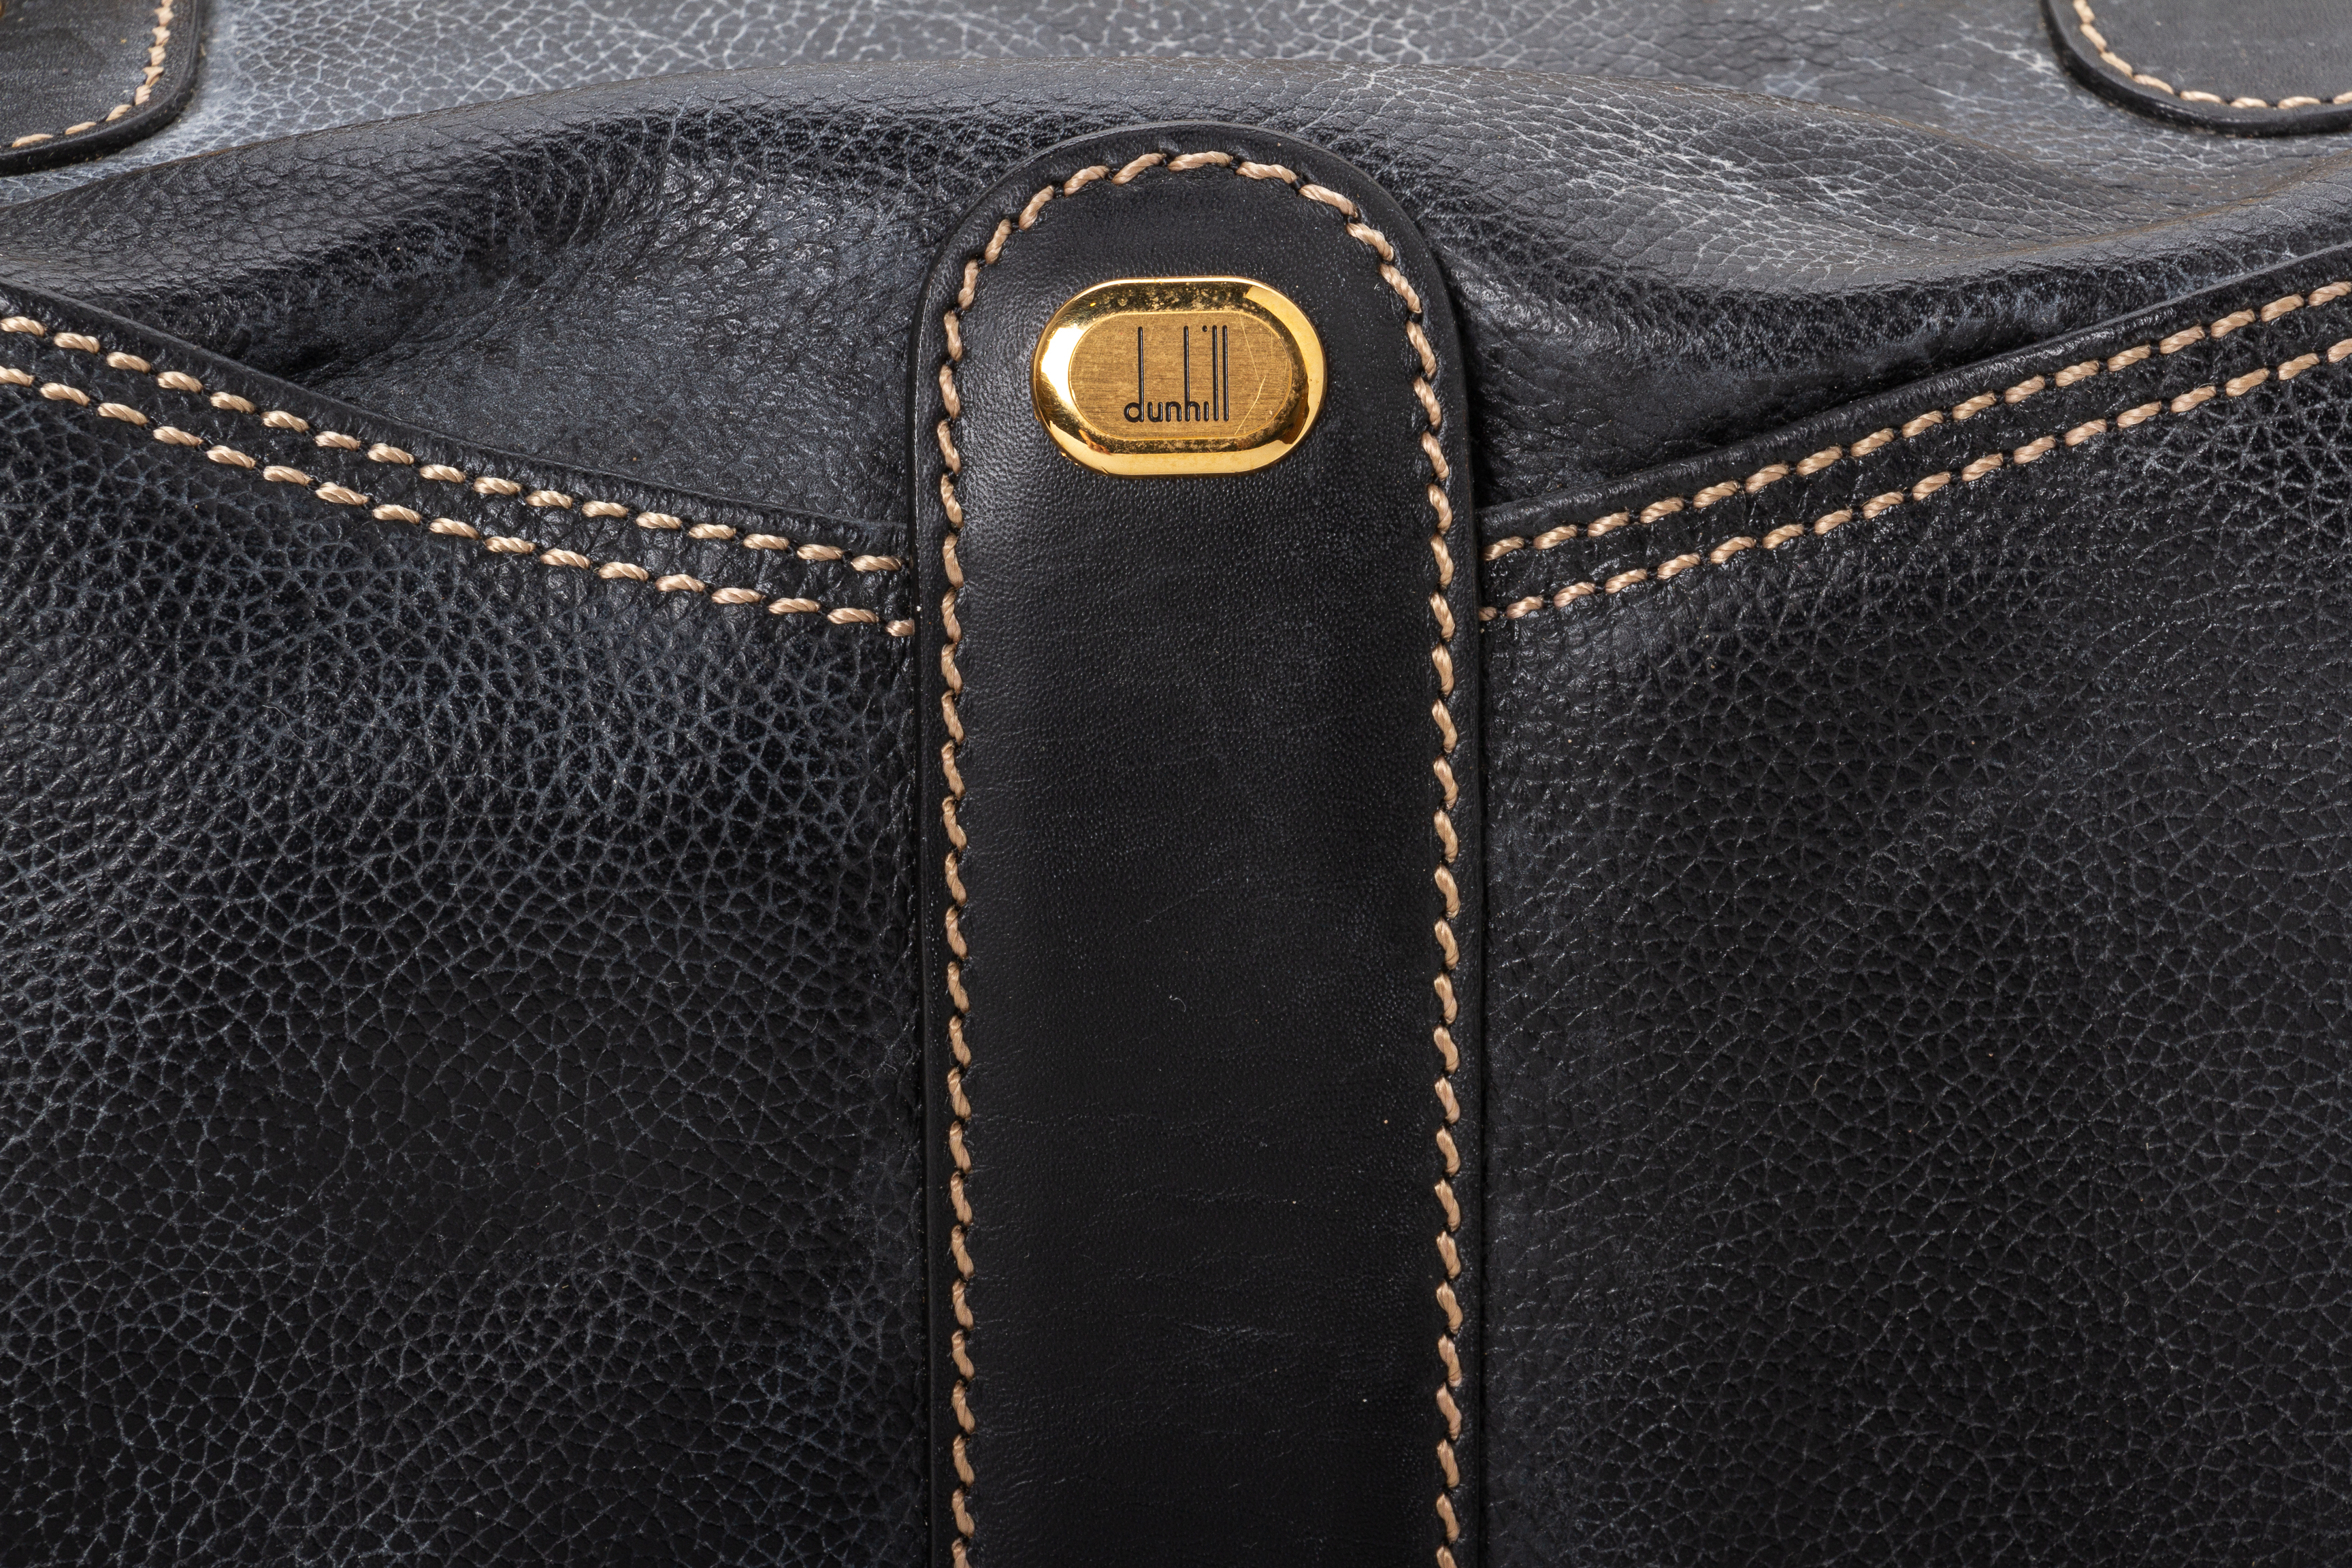 TWO DUNHILL LEATHER HOLDALLS - Image 9 of 9